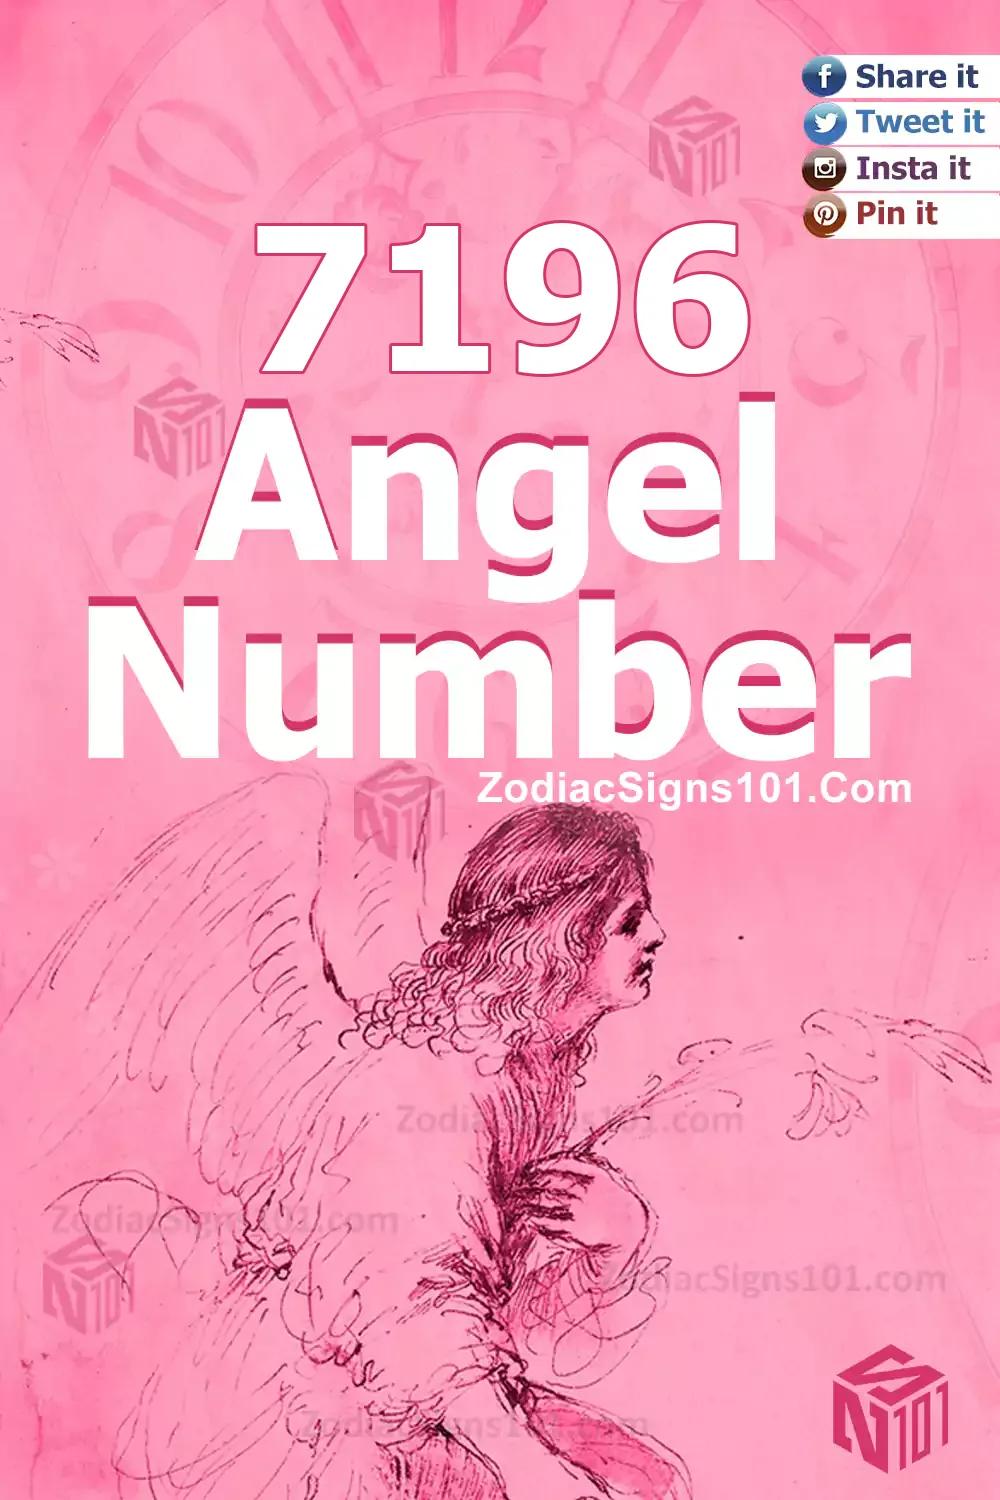 7196 Angel Number Meaning